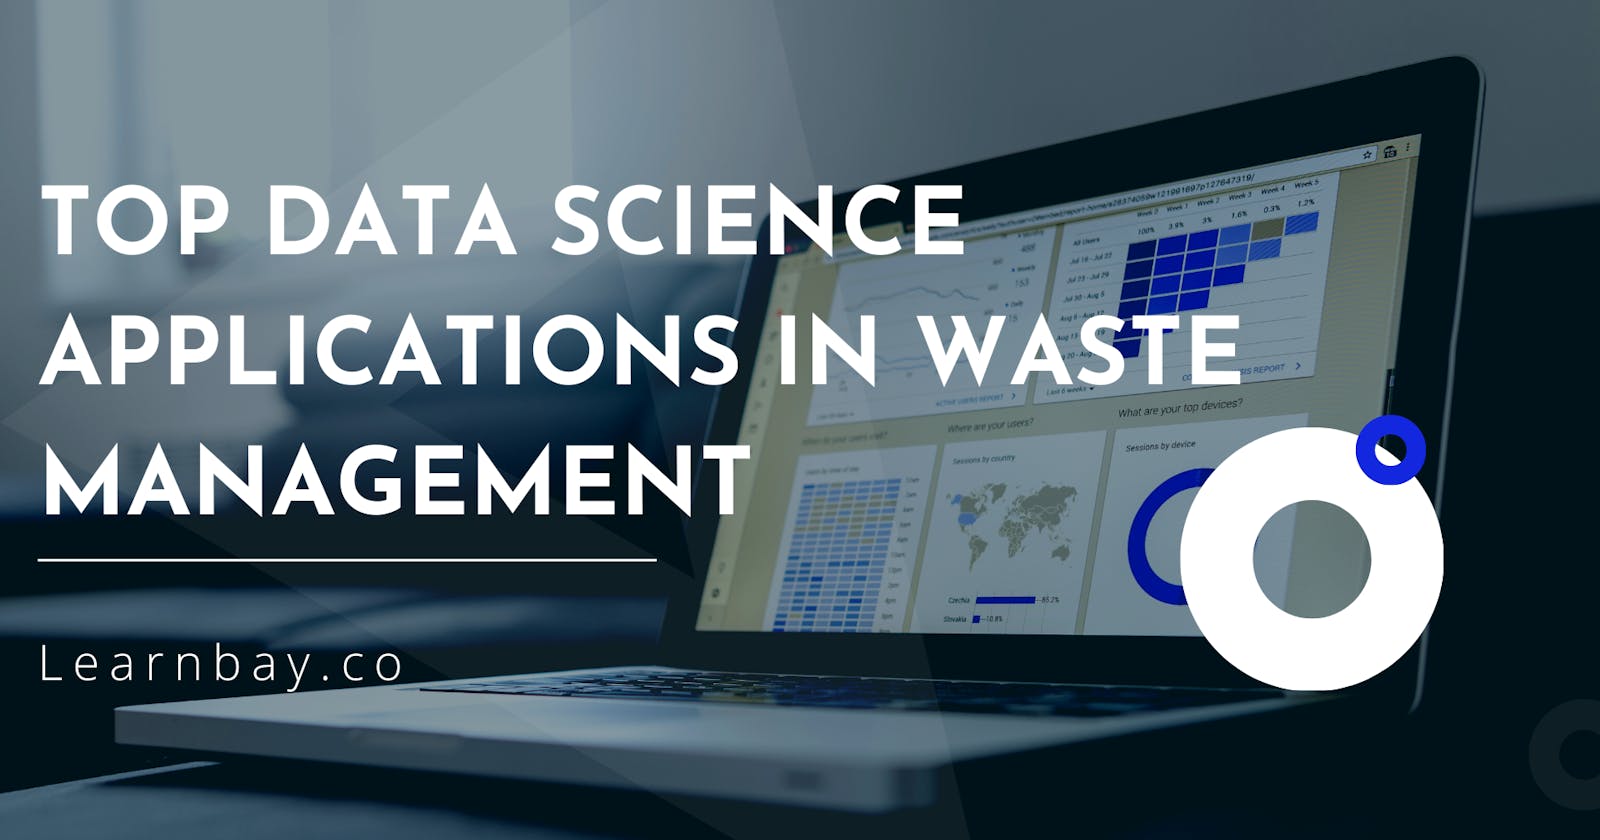 Top Data Science Applications in Waste Management